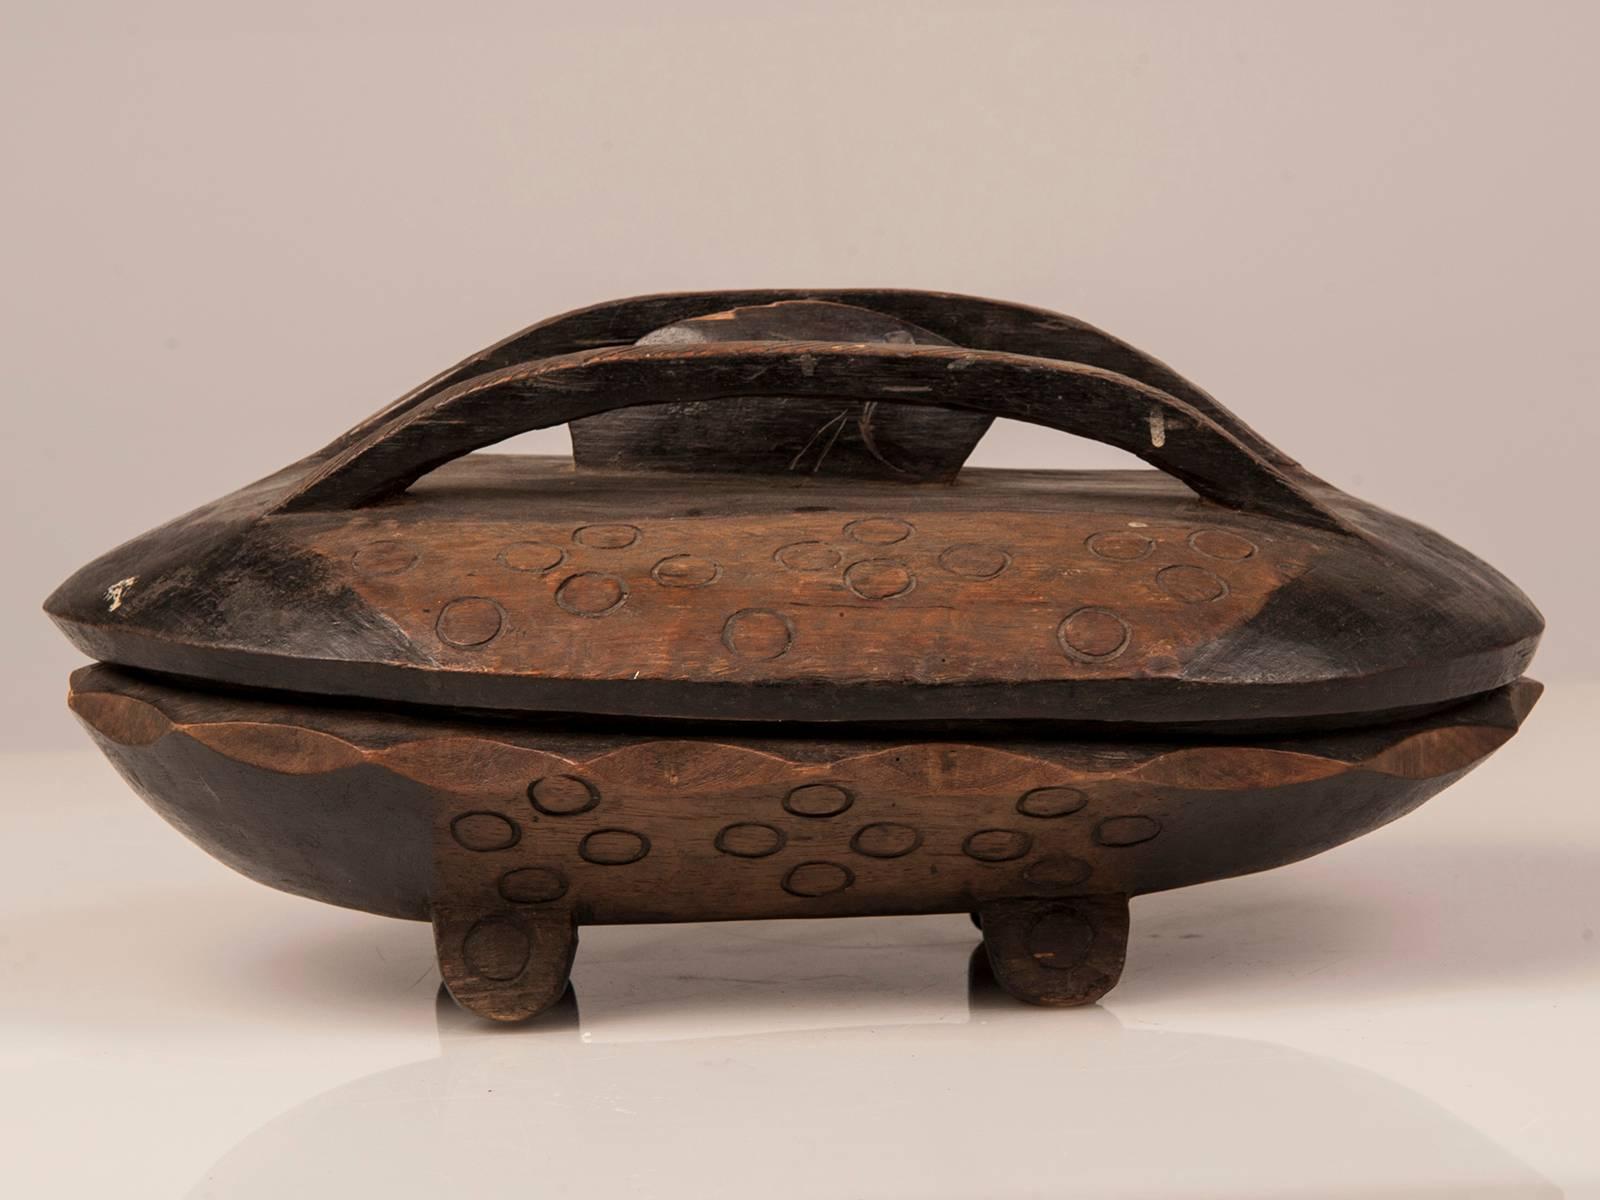 An antique African oval Zambian food bowl hand-carved and decorated from native timber with a interior divided food compartment and the original top from Africa circa 1900. Featuring native motifs and signs of use through the years this is an